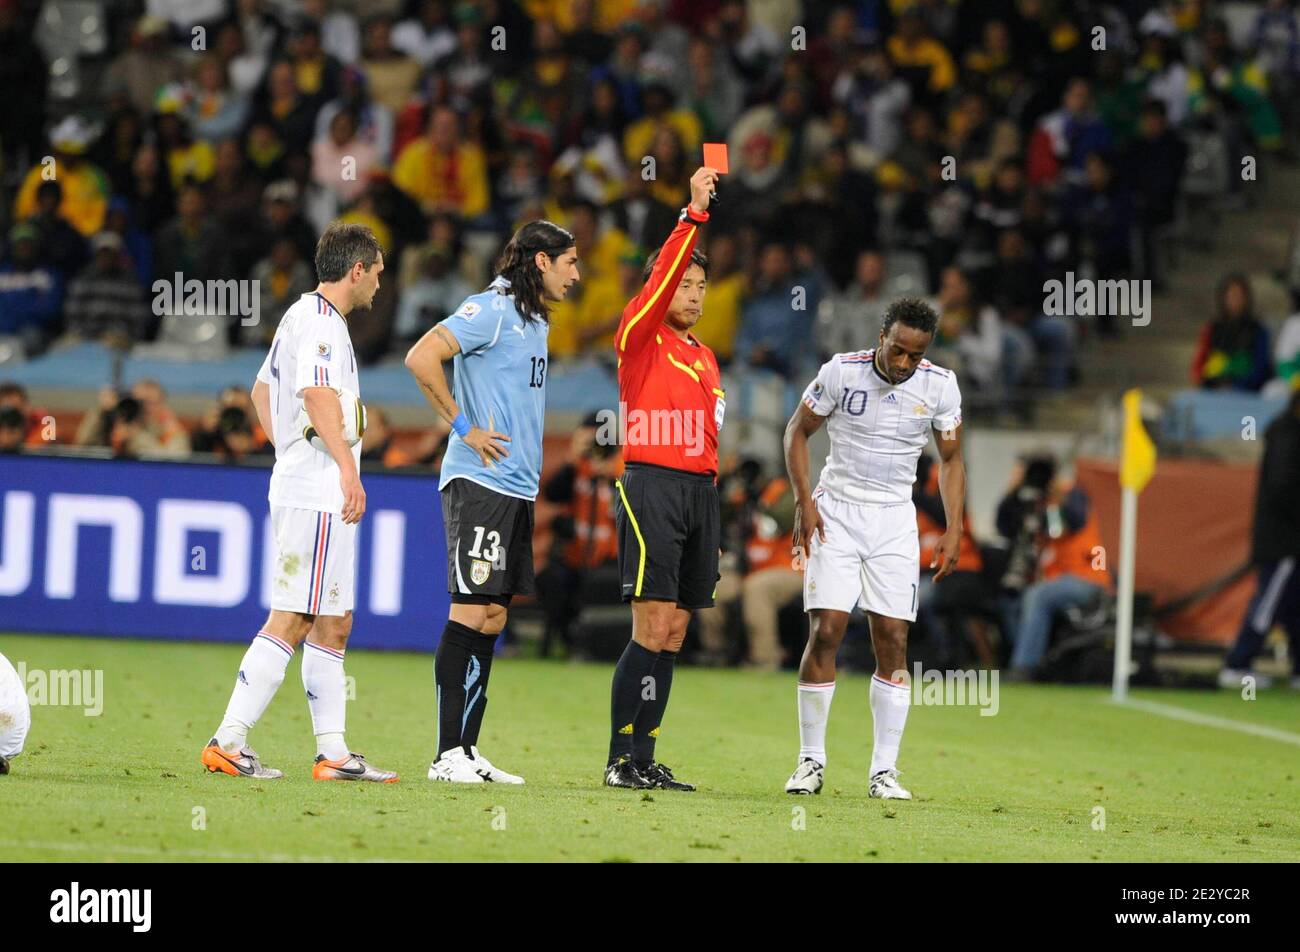 Uruguay's Nicolas Lodeiro gets a red card during the World Cup 2010 soccer match, Group A, France (France national football team) vs Uruguay of the Soccer World Cup 2010 in Capetown, South Africa on June 11, 2010. The match ended in a 0-0 draw. Photo by Henri Szwarc/ABACAPRESS.COM Stock Photo